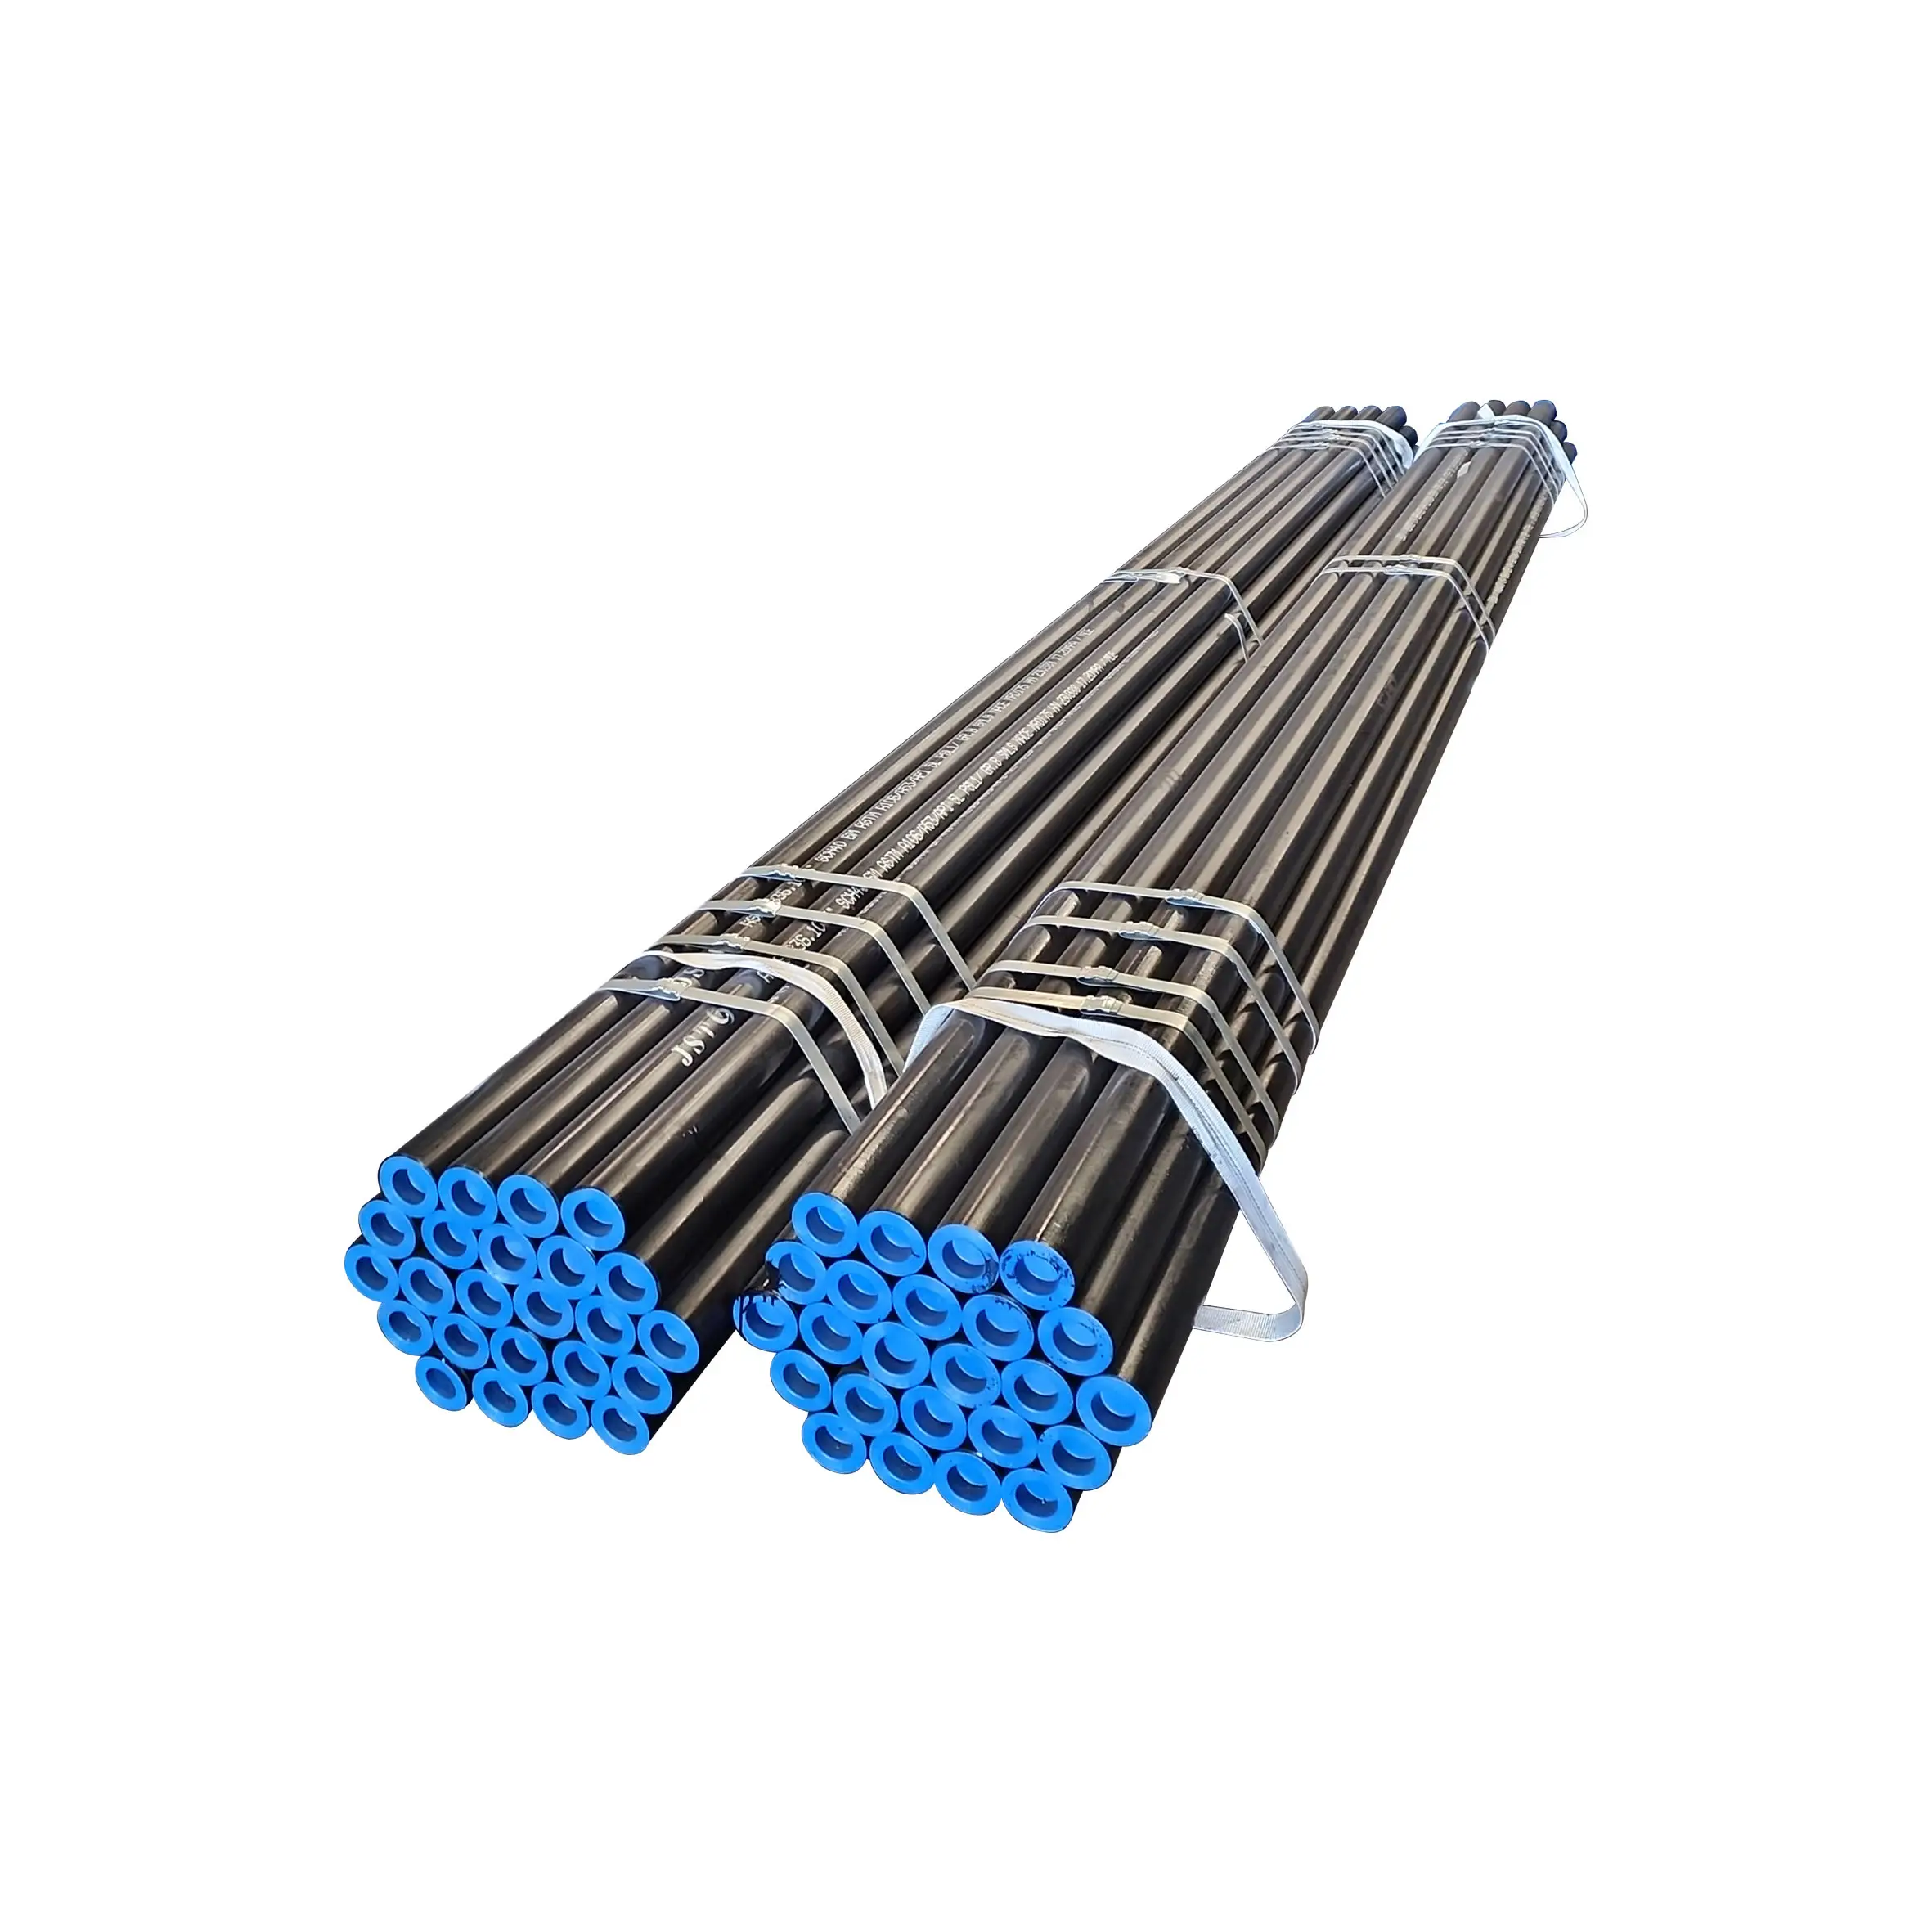 With Fast Delivery Fast delivery China Manufacturer API 5L X52 round steel tube 12 Inch Carbon Seamless Steel Pipe